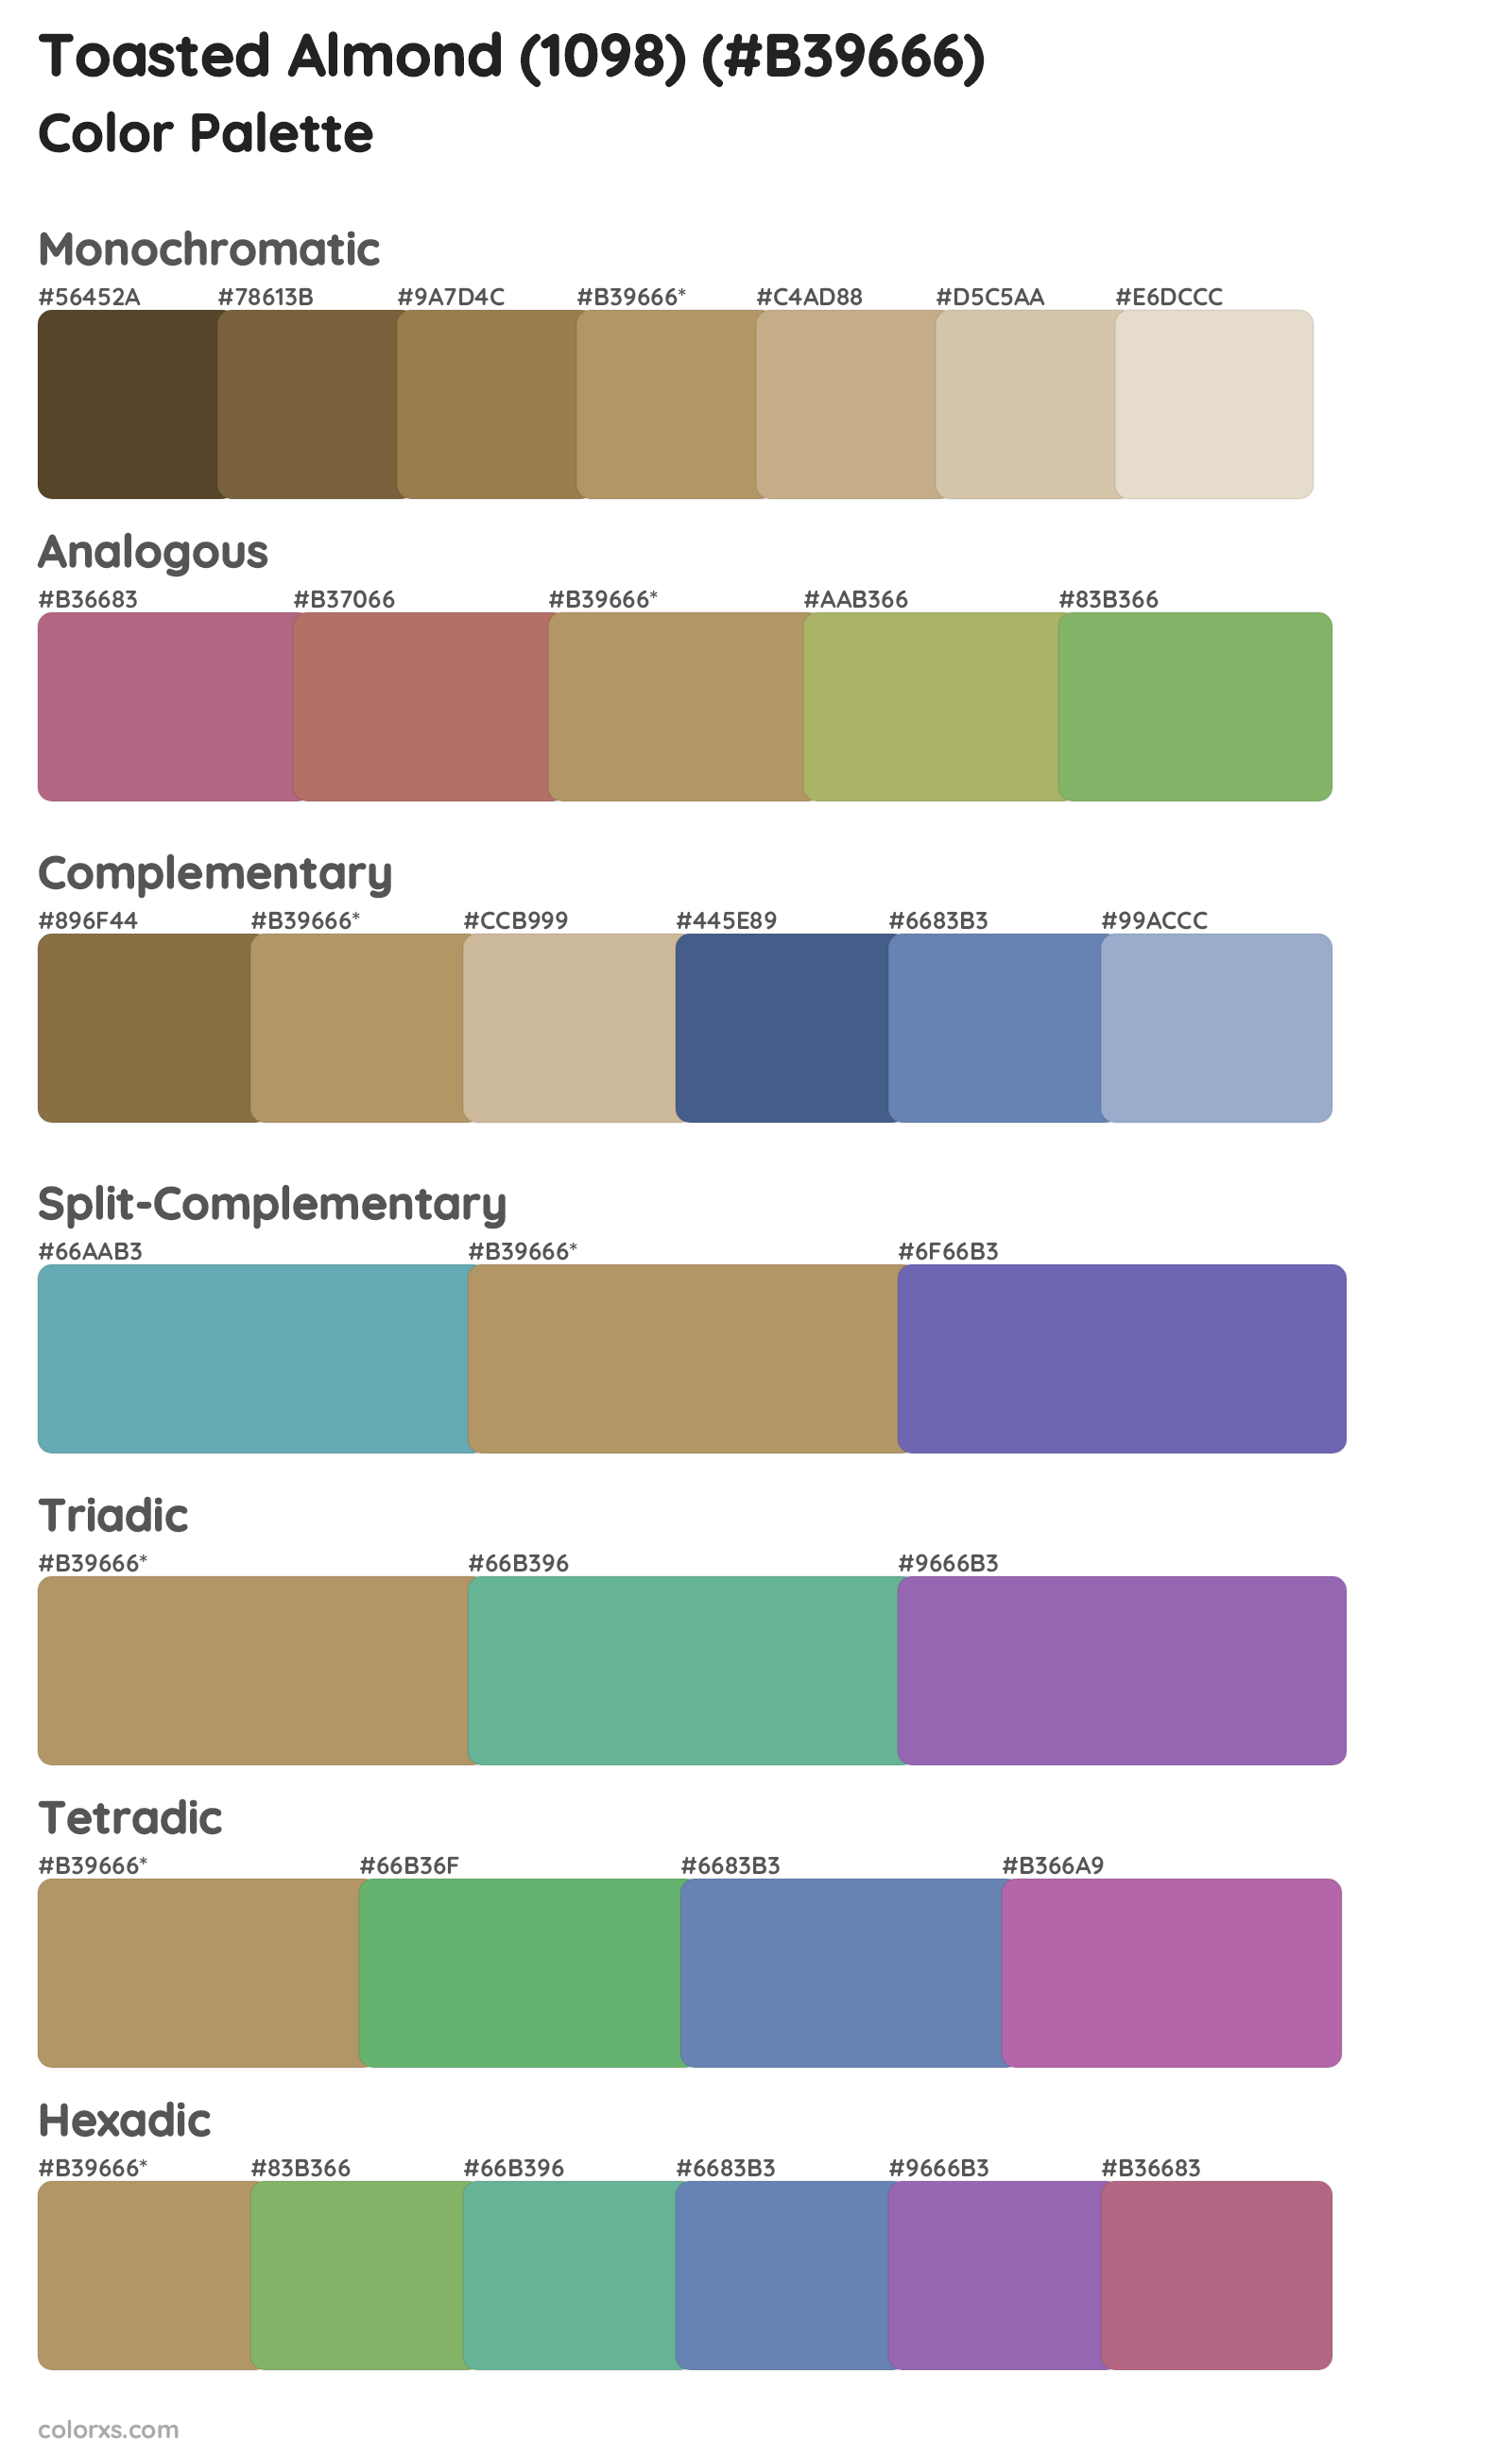 Toasted Almond (1098) Color Scheme Palettes